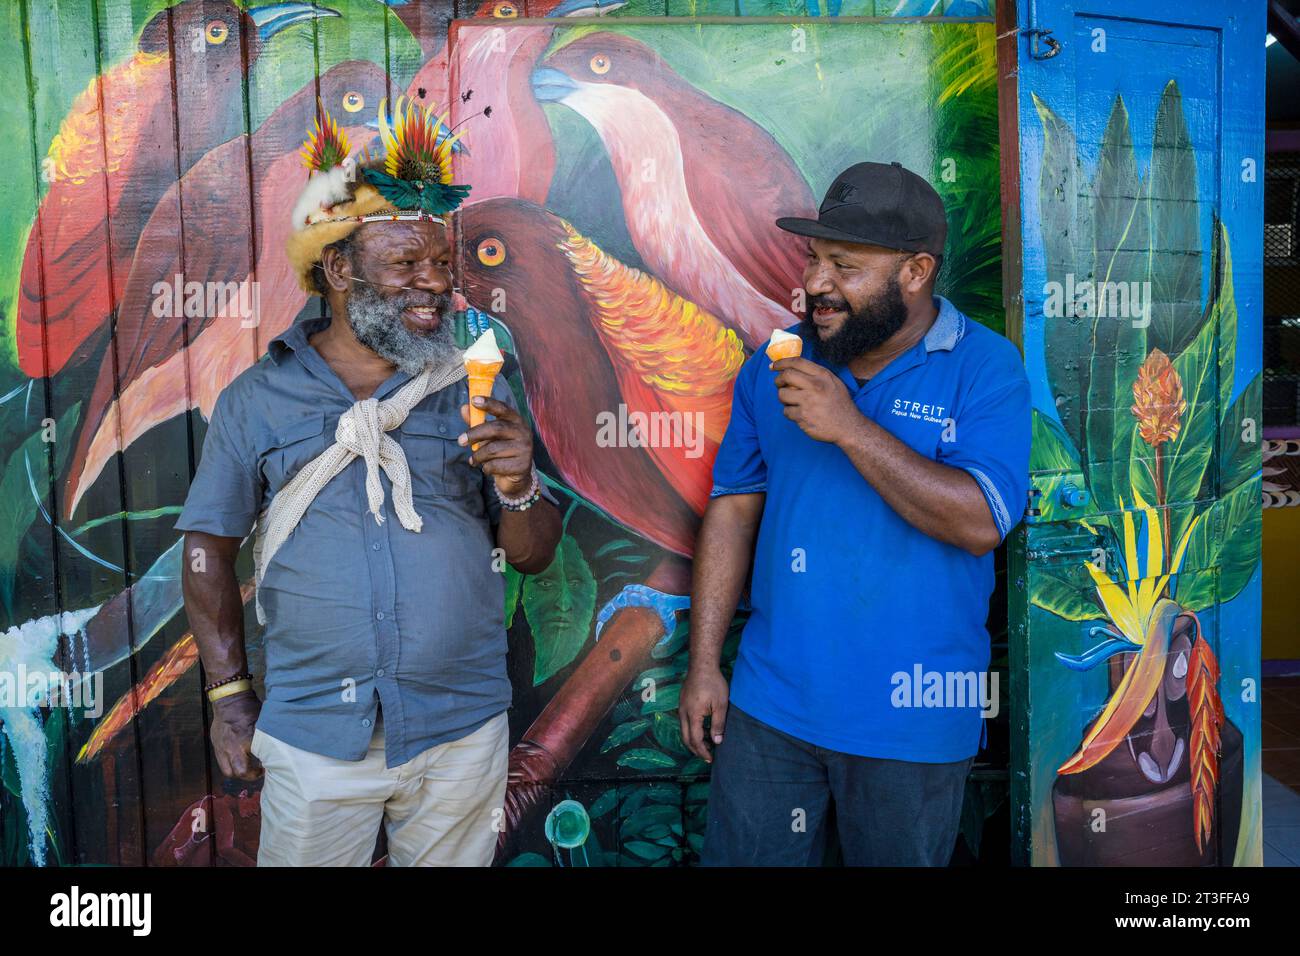 Papua New Guinea, Sepik province, chef Mundiya Kepanga eating an ice cream vanilla specialist Nanda Siri during a vanilla cultivation training in agroforestry as part of the STREIT project funded by the European Union Stock Photo